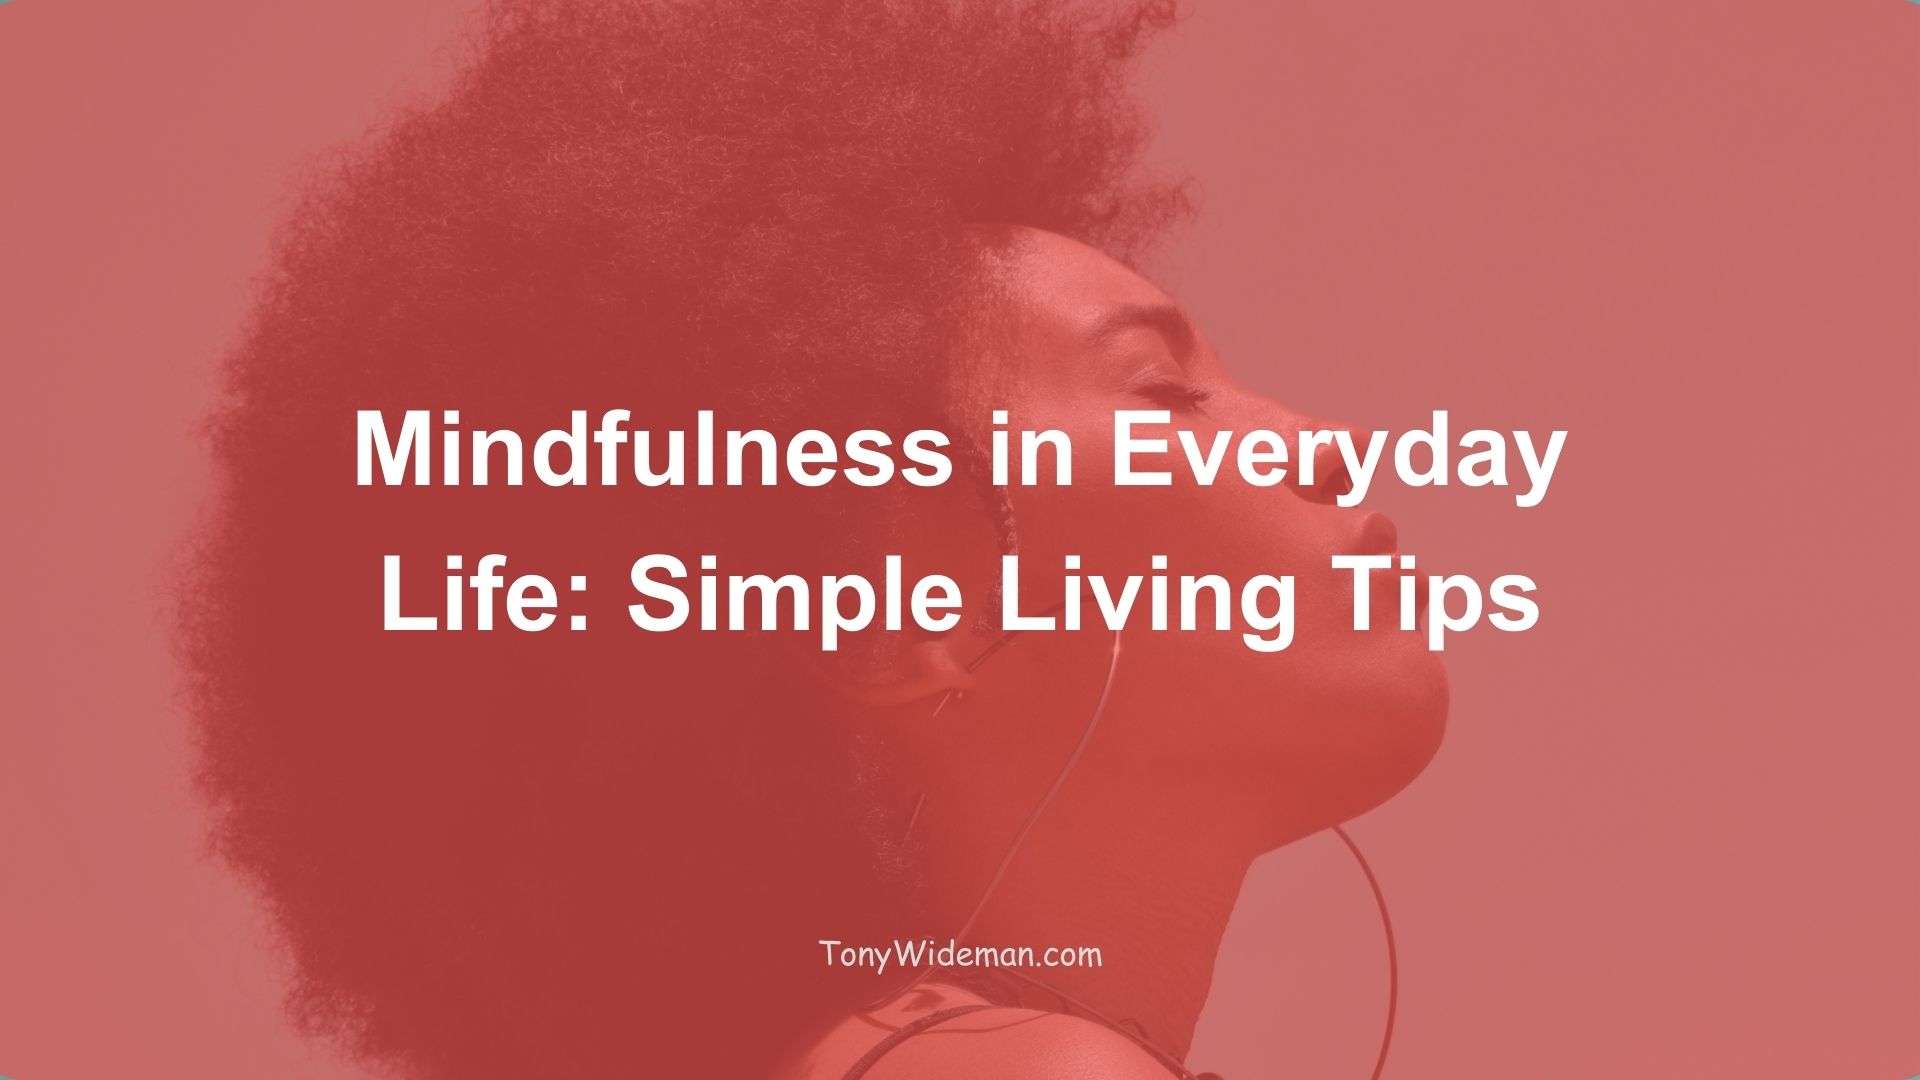 Mindfulness in Everyday Life: Simple Living Tips